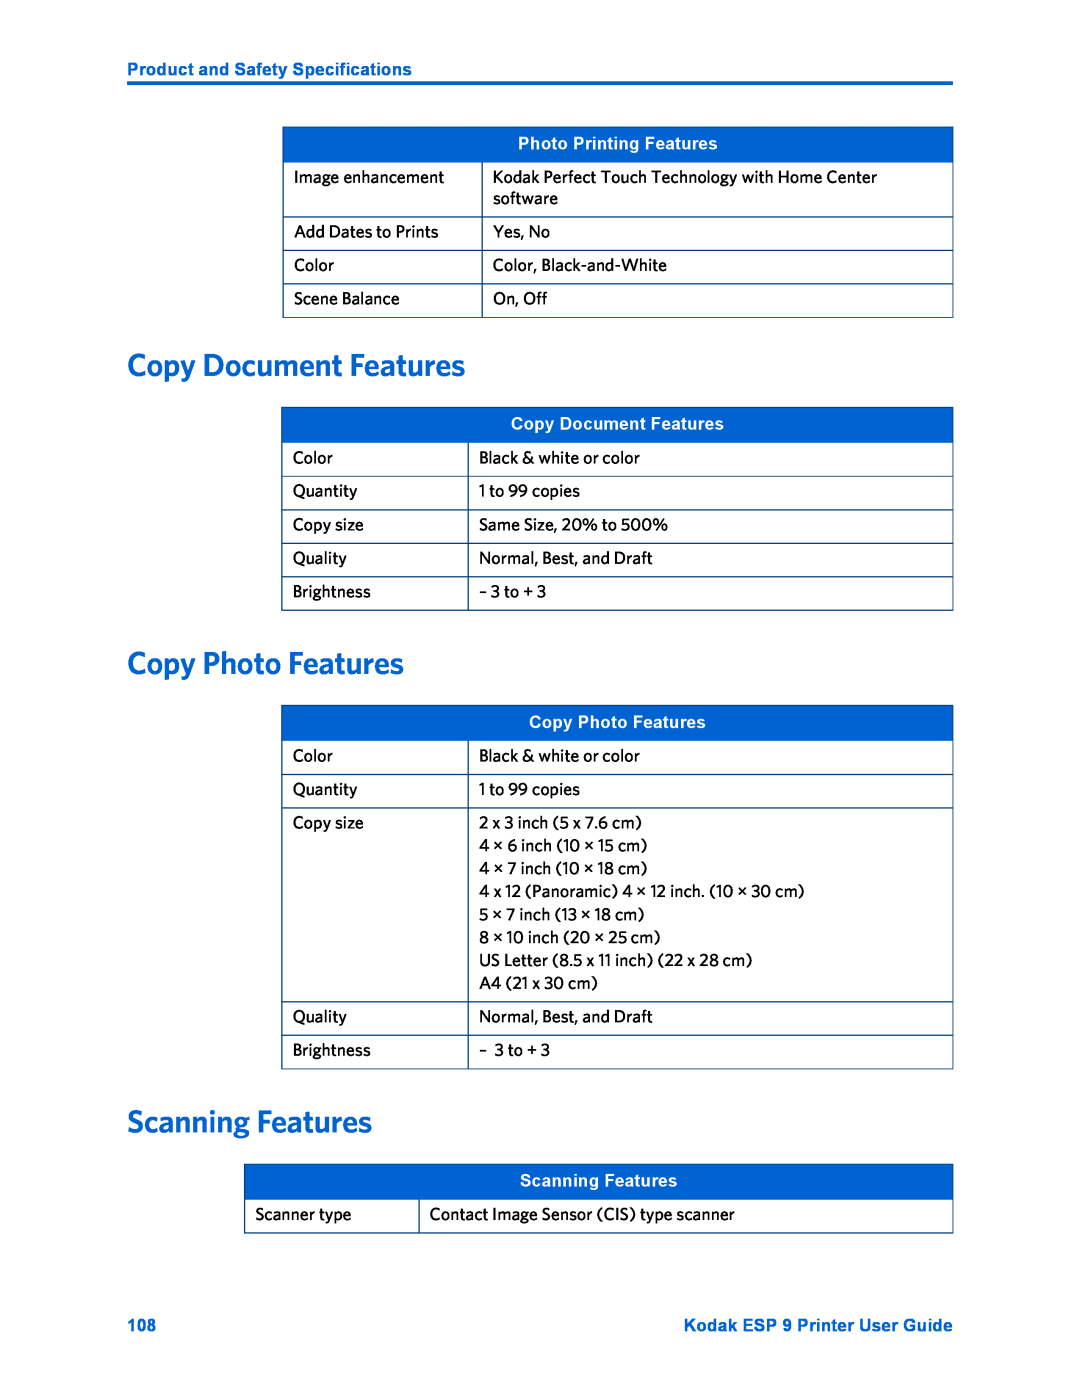 Kodak ESP 9 manual Copy Document Features, Copy Photo Features, Scanning Features, Product and Safety Specifications 